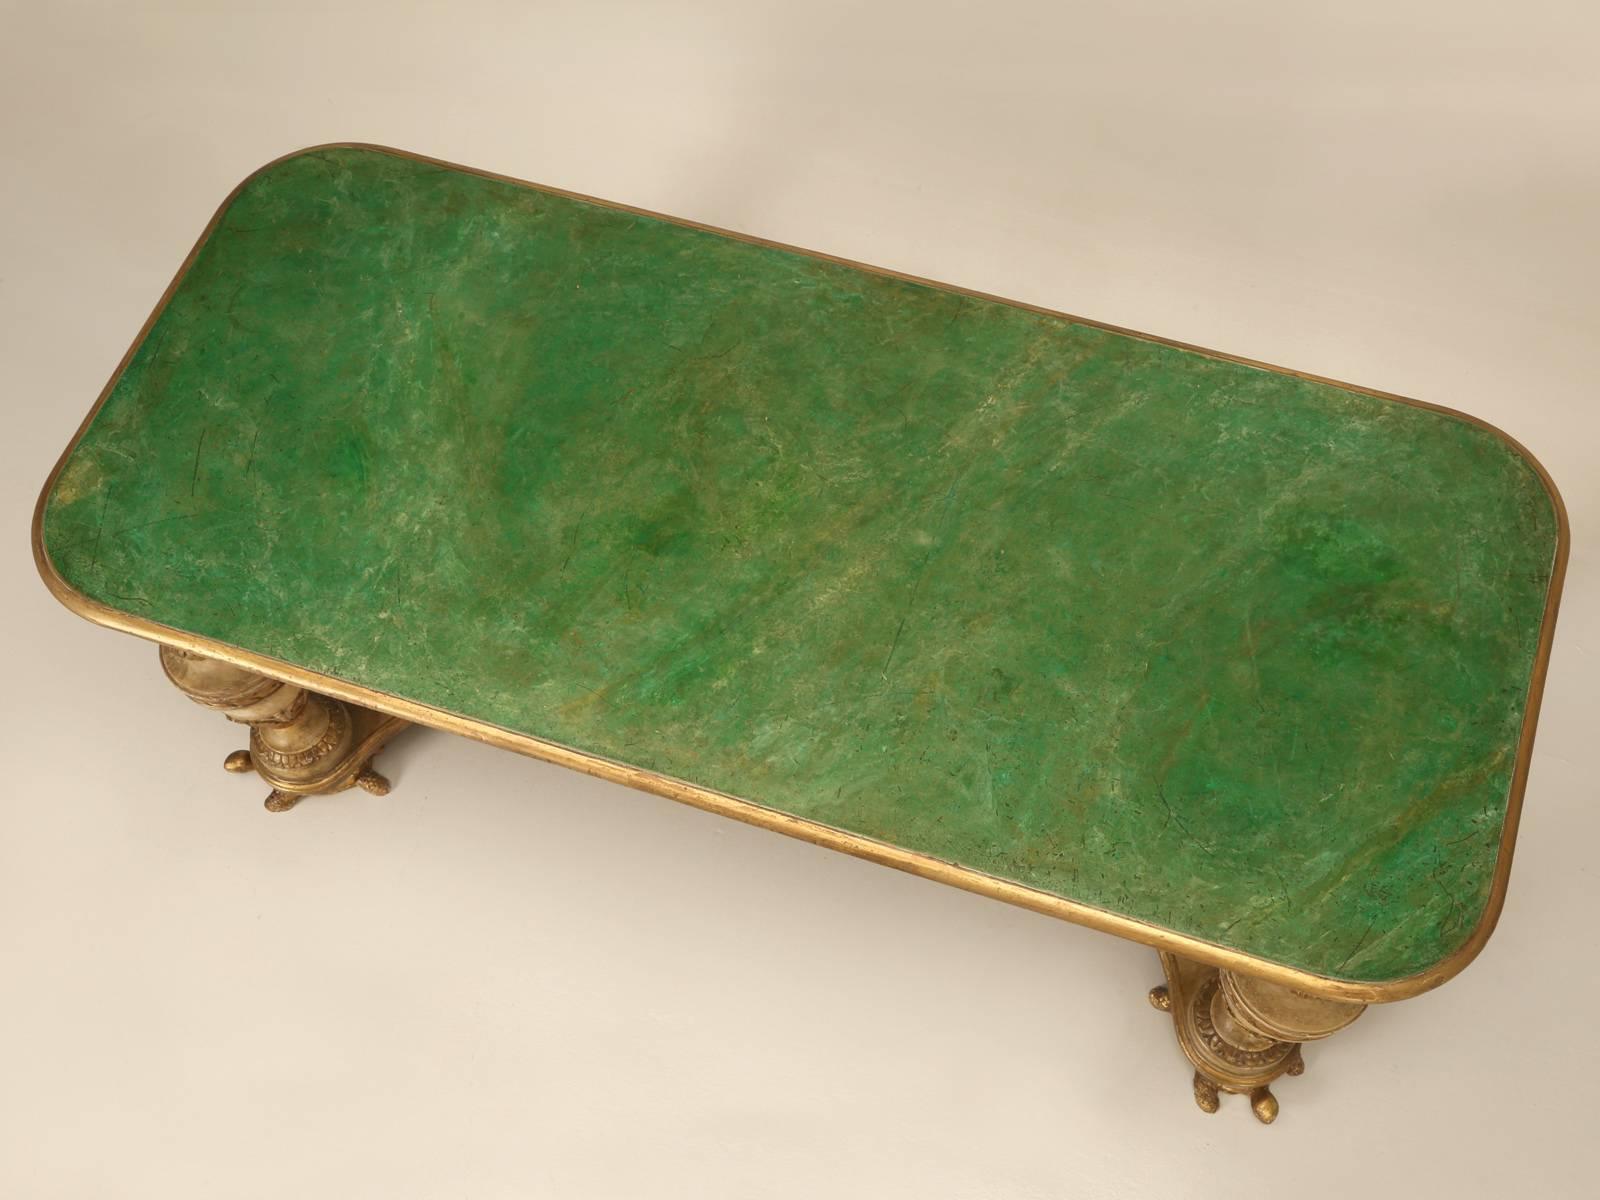 Incredible antique table from Napoli, Italy made during the 19th century. The finish appears to be all original, from the paint to the faux marble green top. What makes this table so interesting, are the hand-carved turtles used for the feet and I